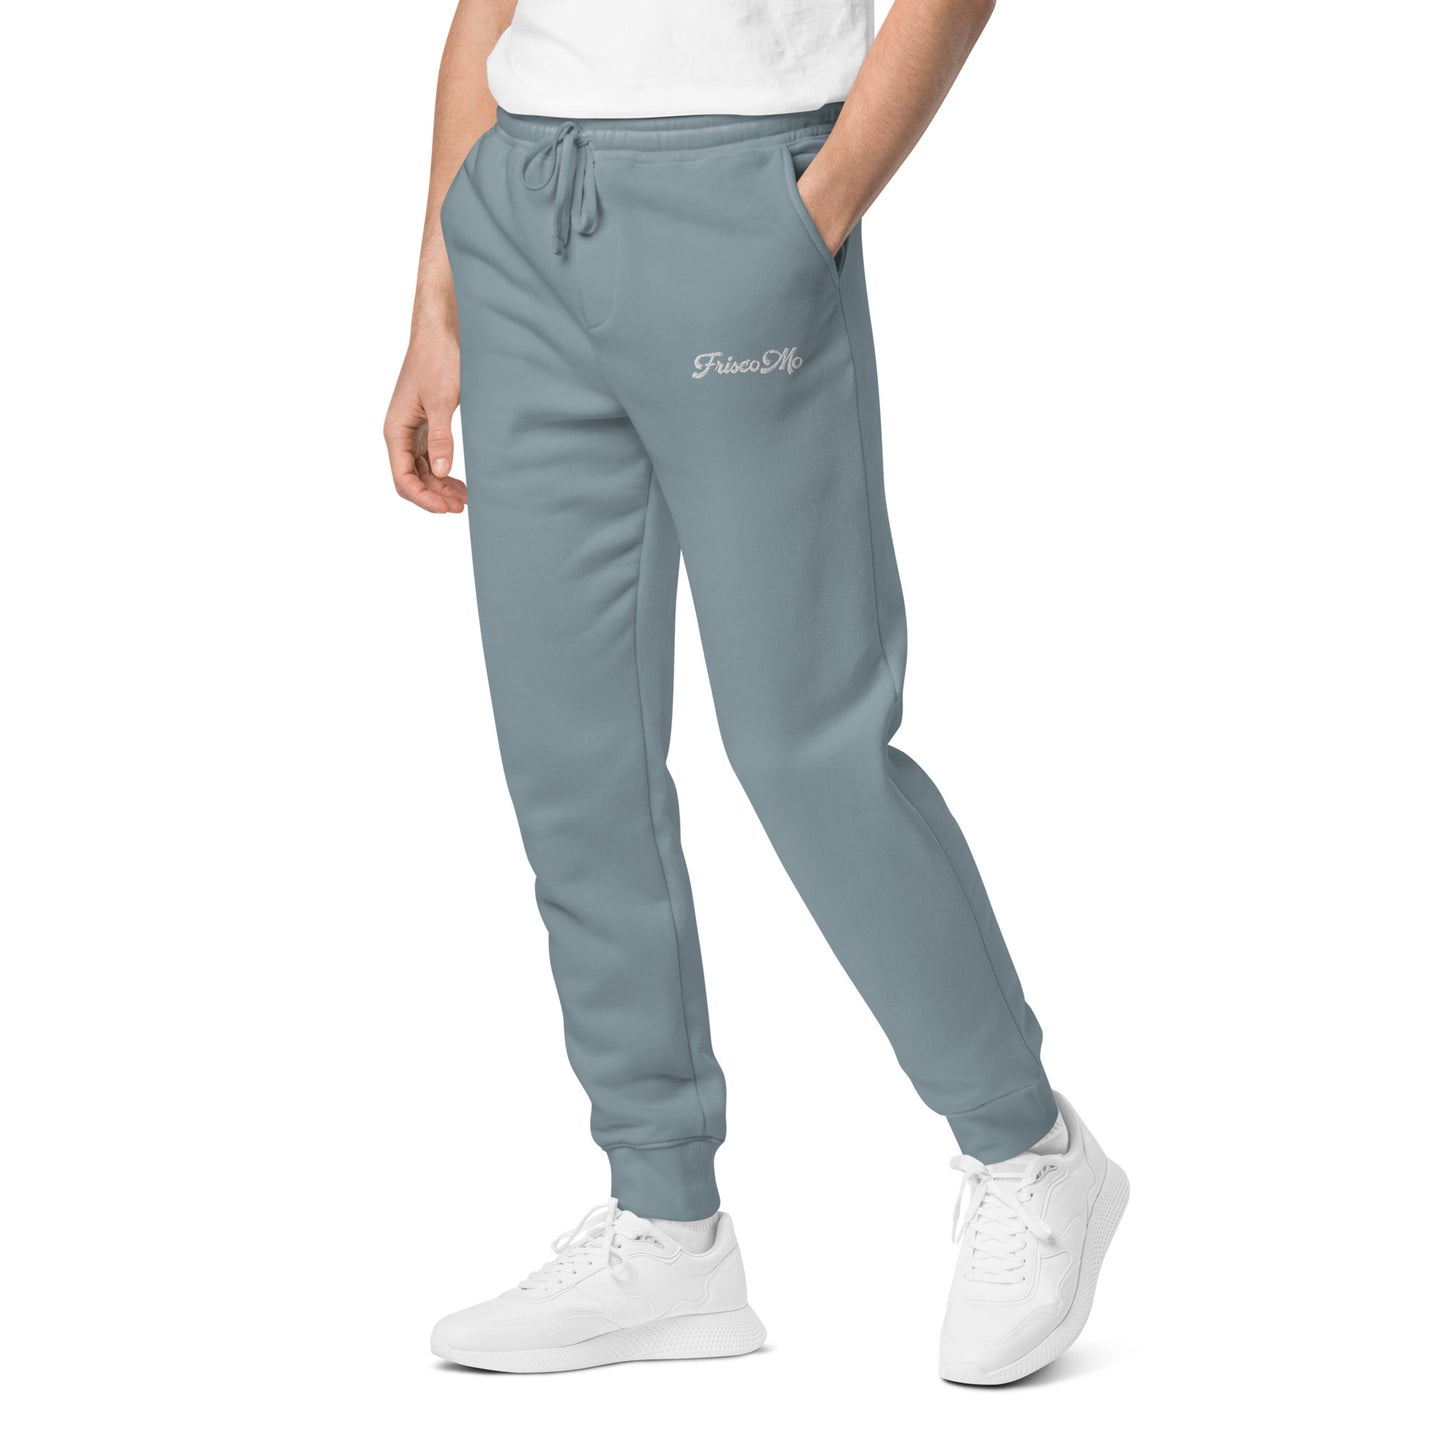 Frisco Mo Embroidered Pigment-Dyed Sweatpants